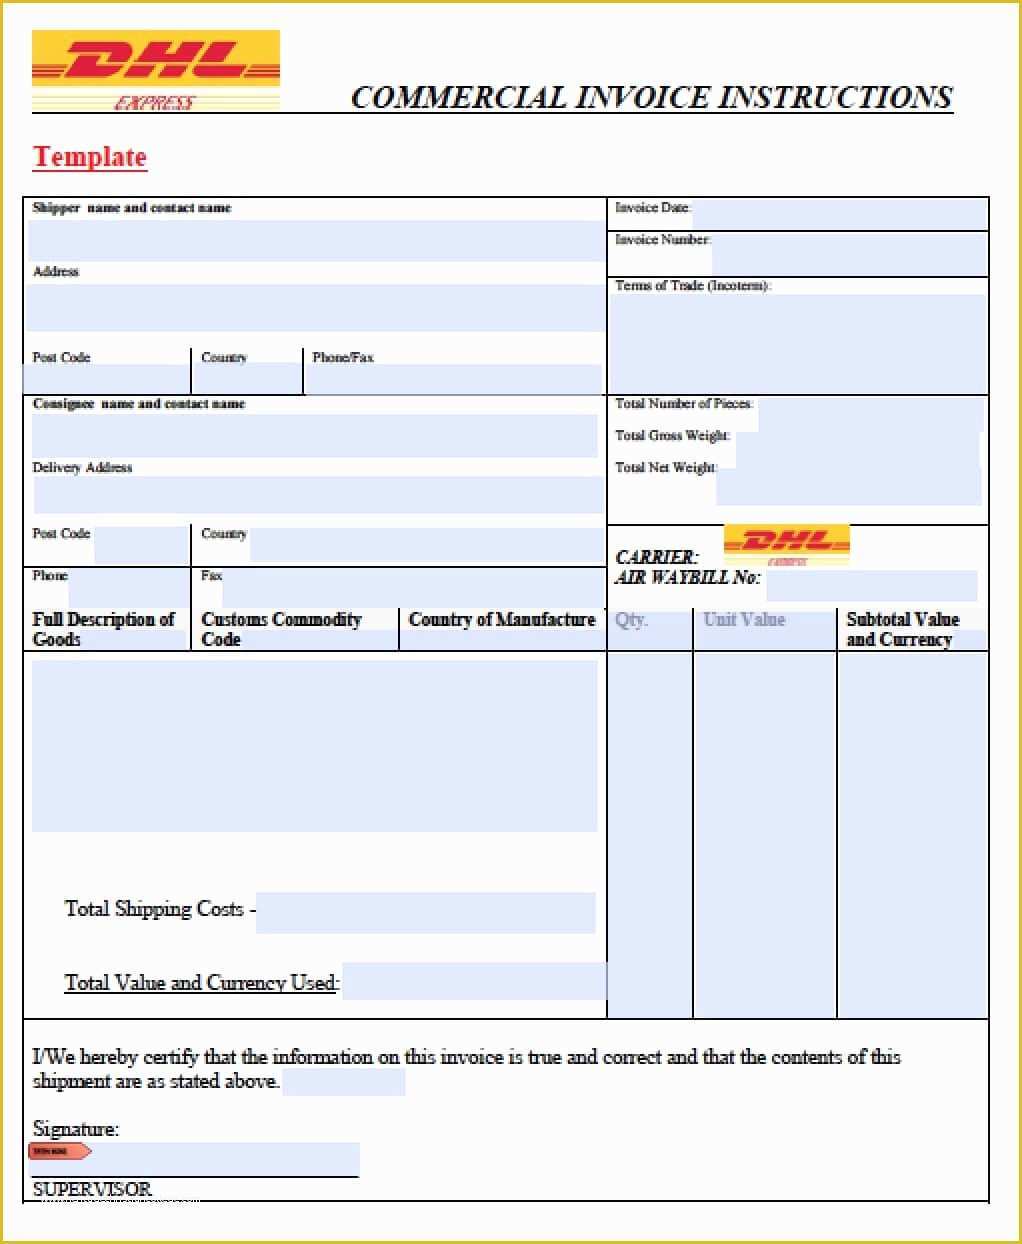 Commercial Invoice Template Excel Free Download Of Dhl Mercial Invoice Template